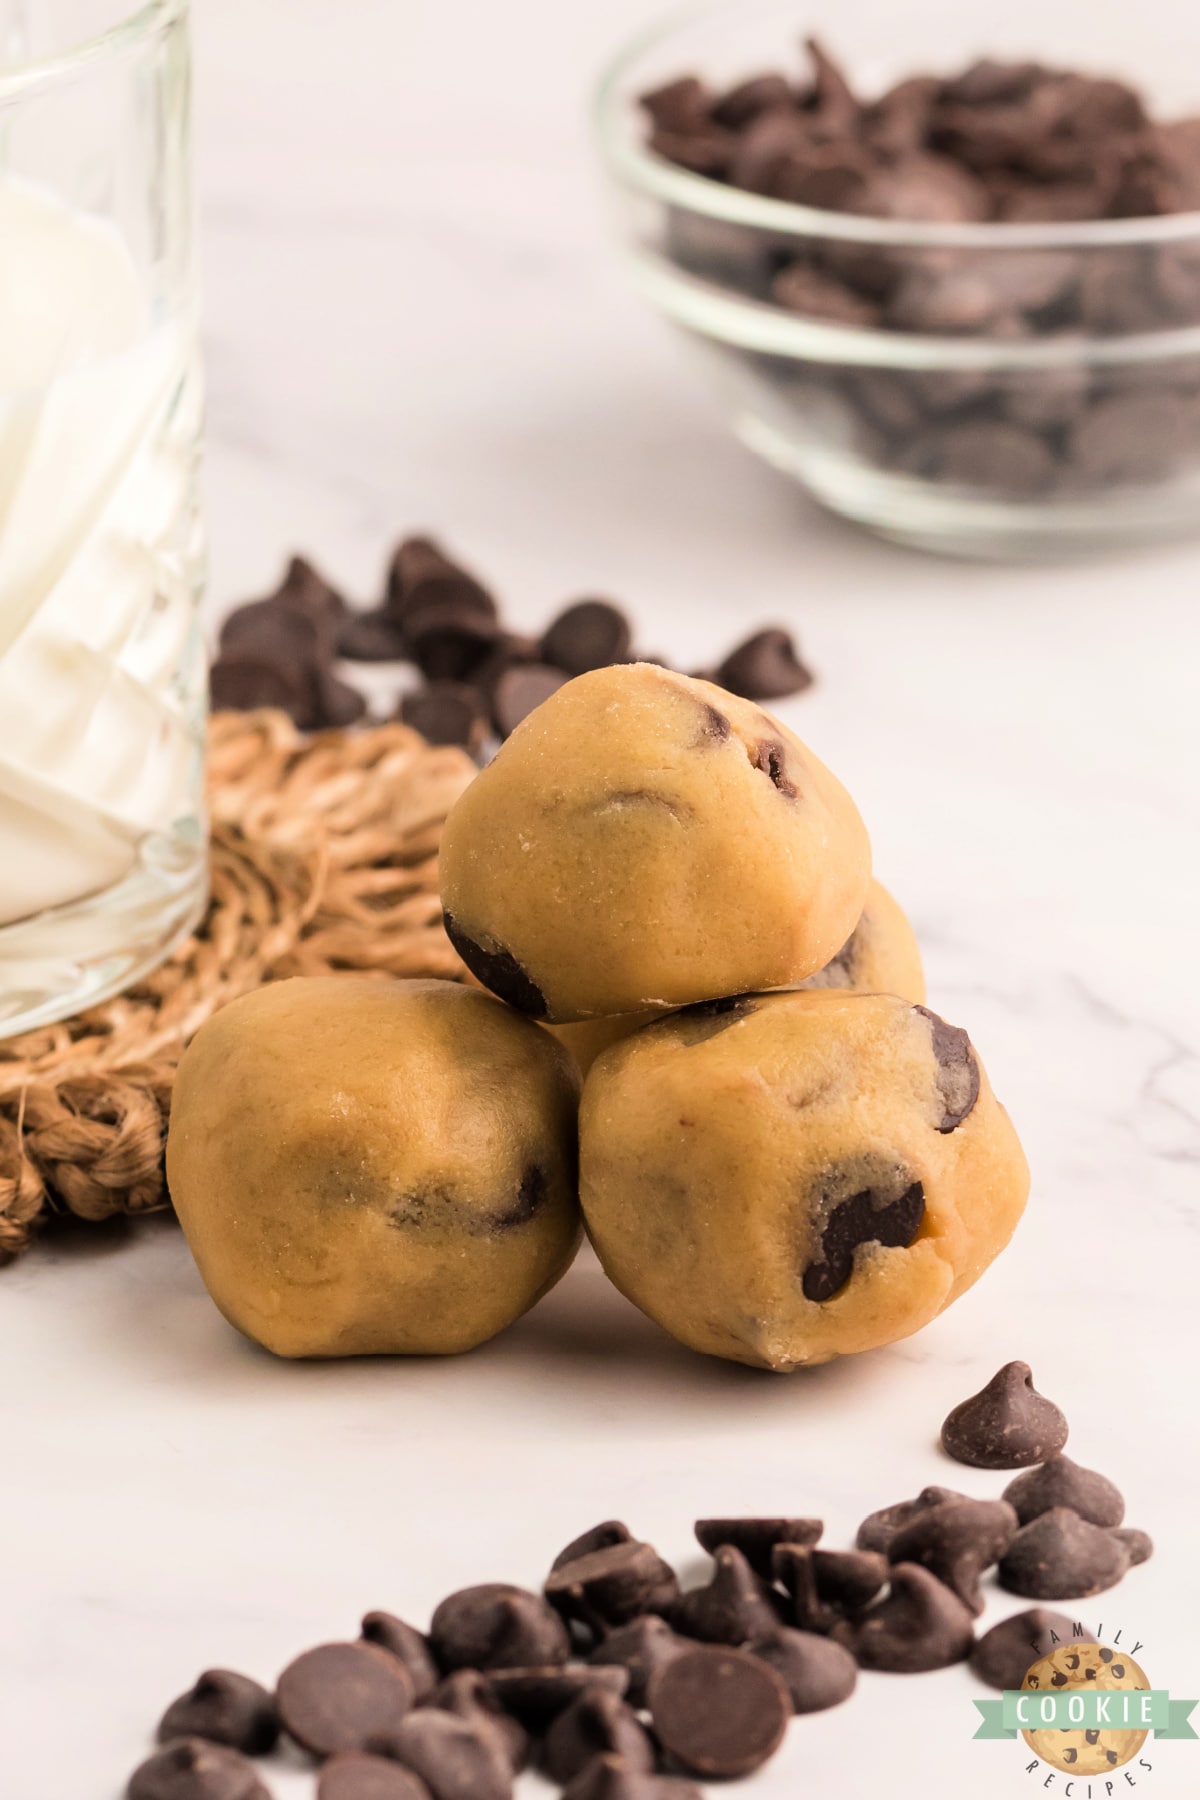 Chocolate Chip Cookie Dough Bites are the ultimate way to enjoy eating raw cookie dough, without worrying about the uncooked egg and flour.  Edible chocolate chip cookie dough that is safe to eat, and perfectly portioned for a quick treat!